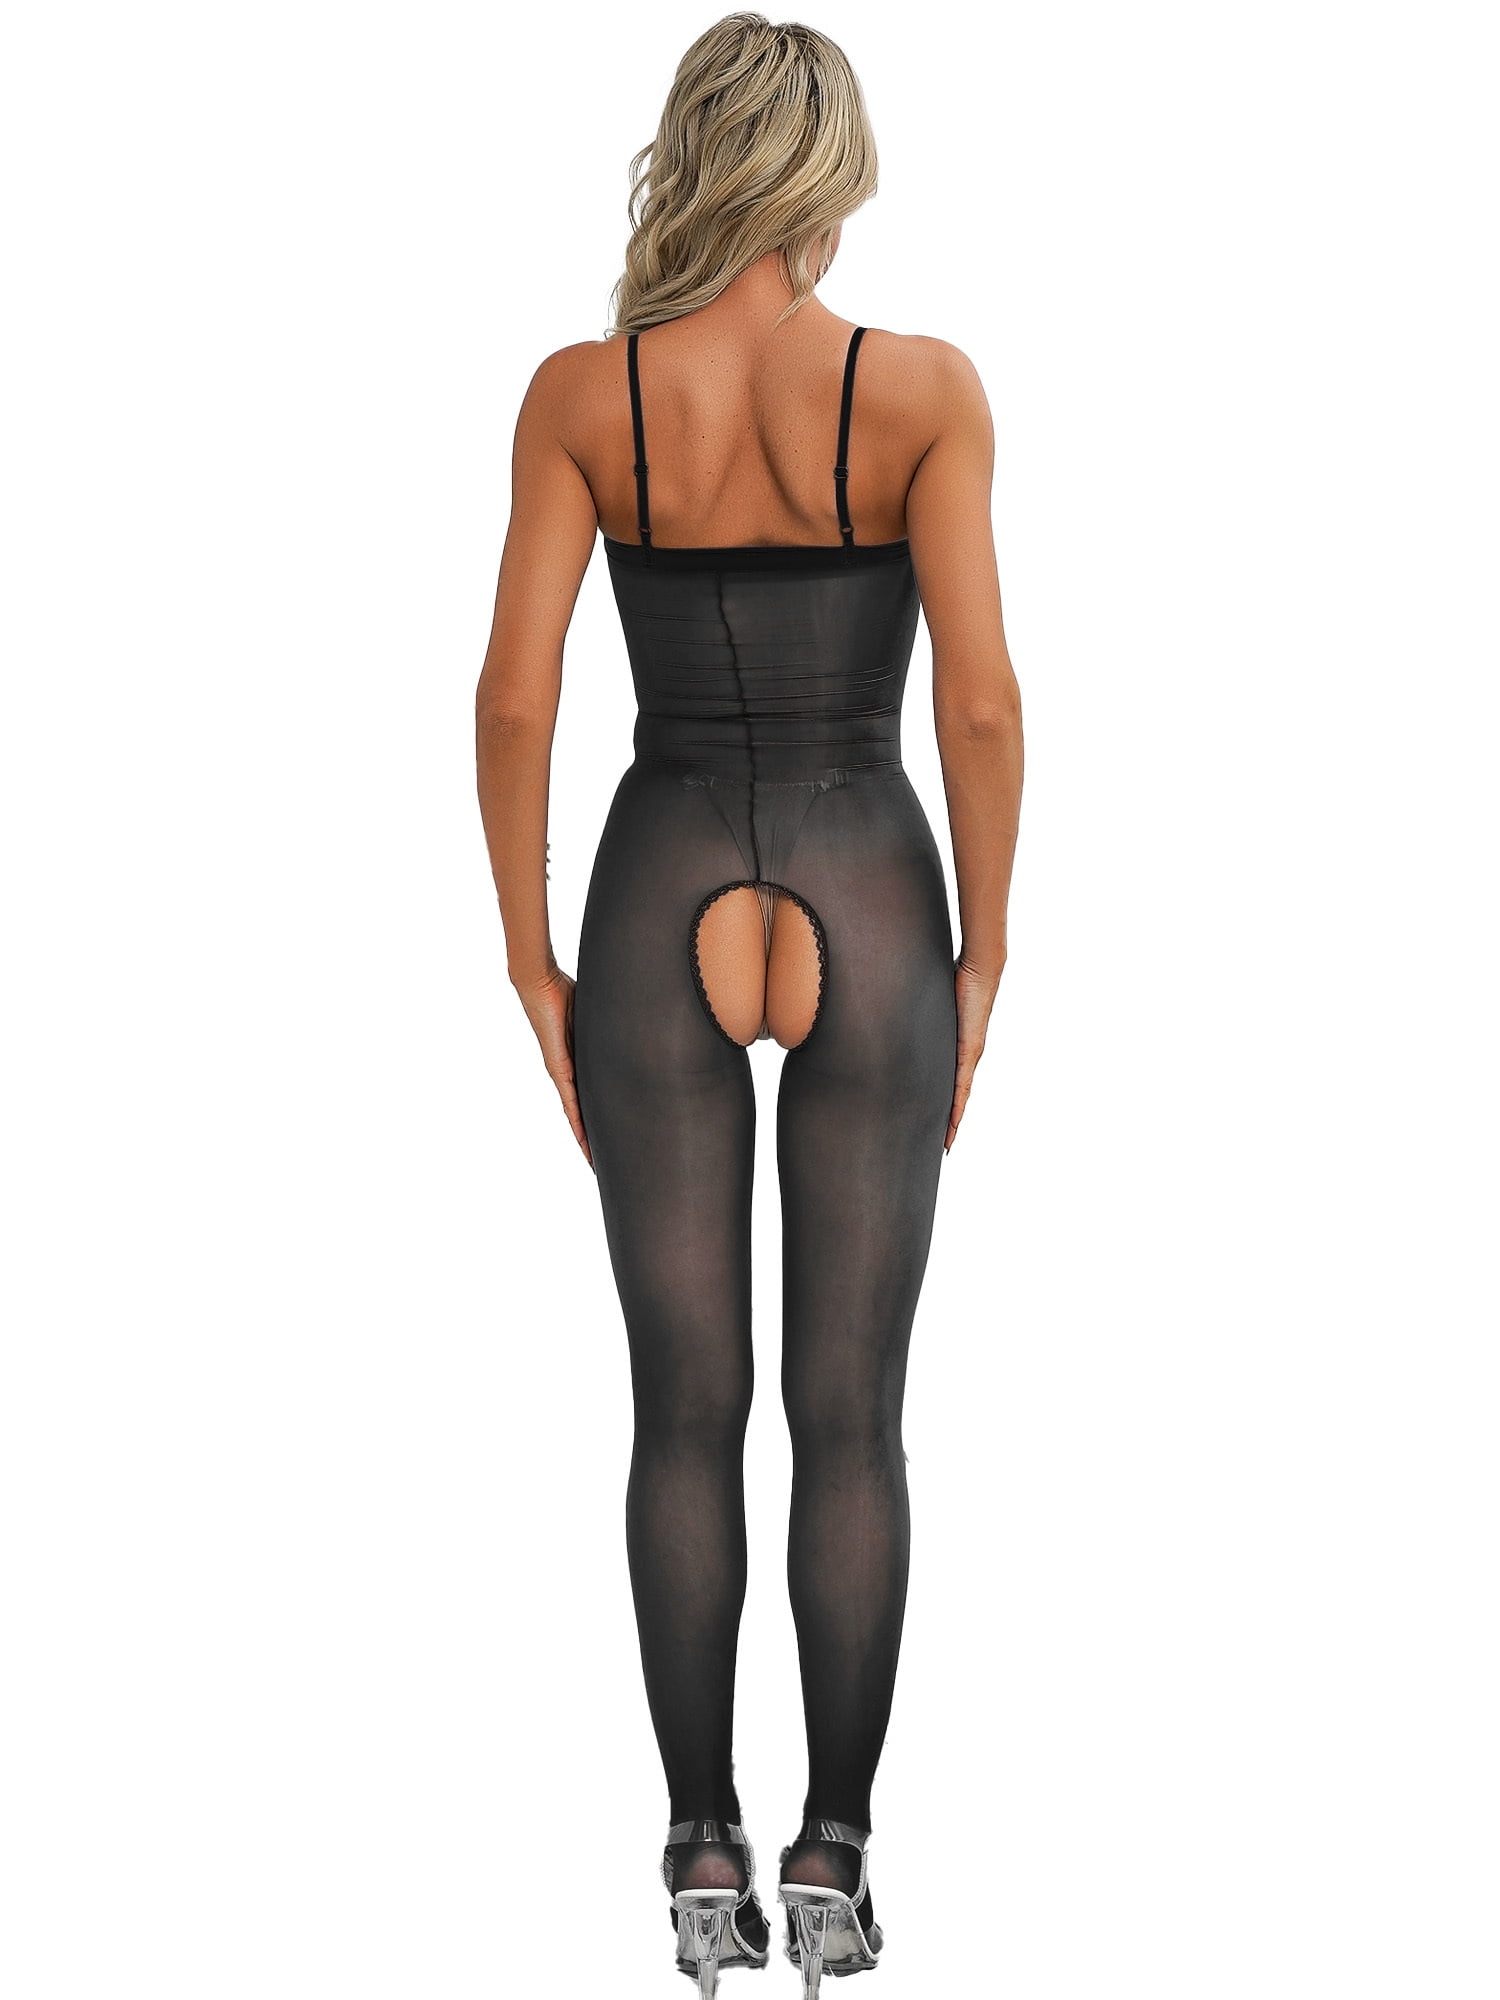 iEFiEL Womens Silky Smooth Bodystocking Nylon Open Crotch Footed Jumpsuit  See Through Bodysuit Coffee Crotchless One Size